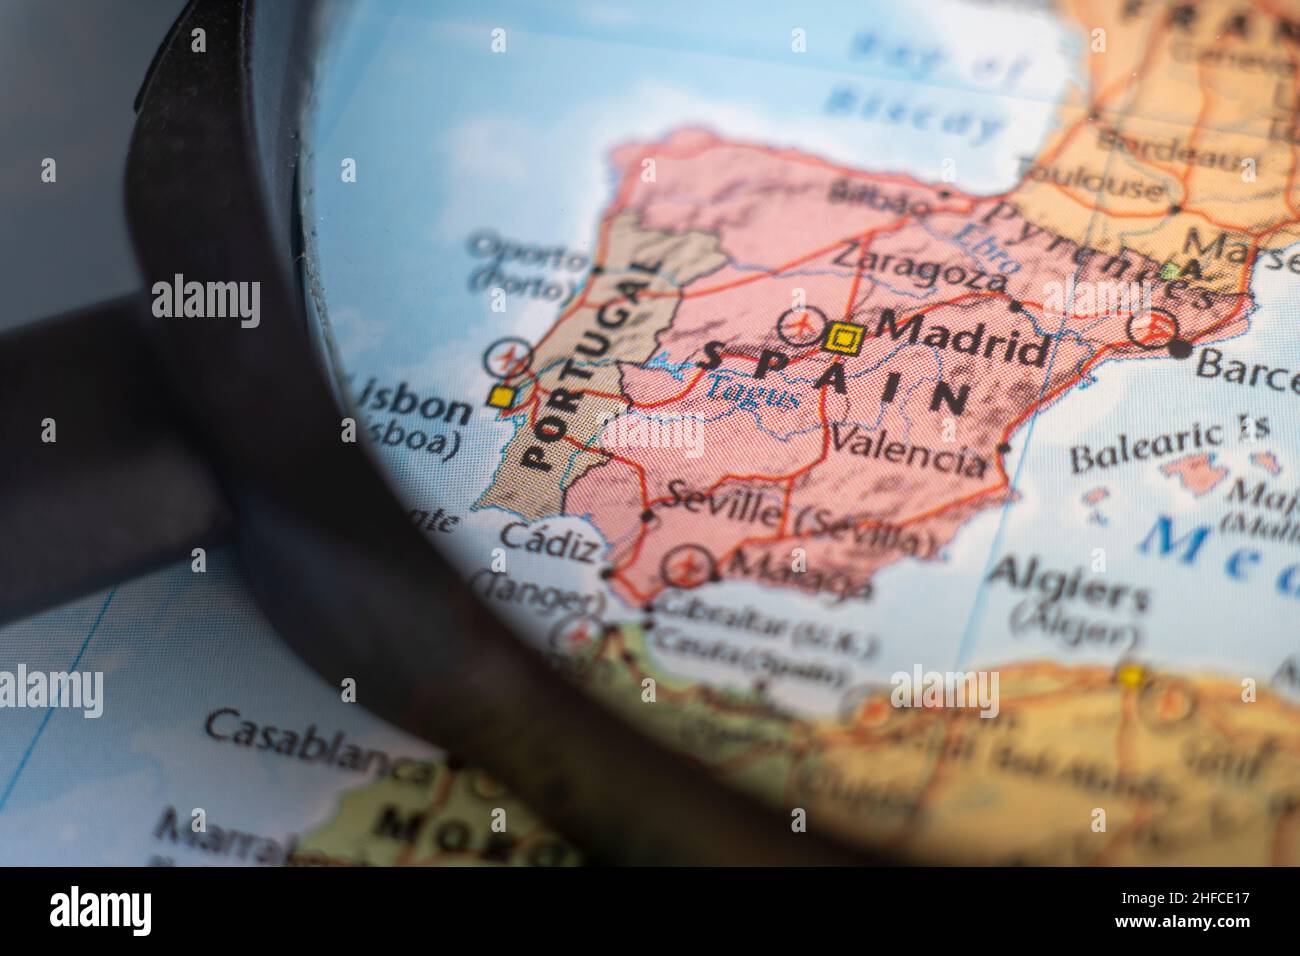 Portugal and Spain, Iberian Peninsulaoo n a world map through magnifying glass. Portugal and spain travel destination planning pinned Stock Photo